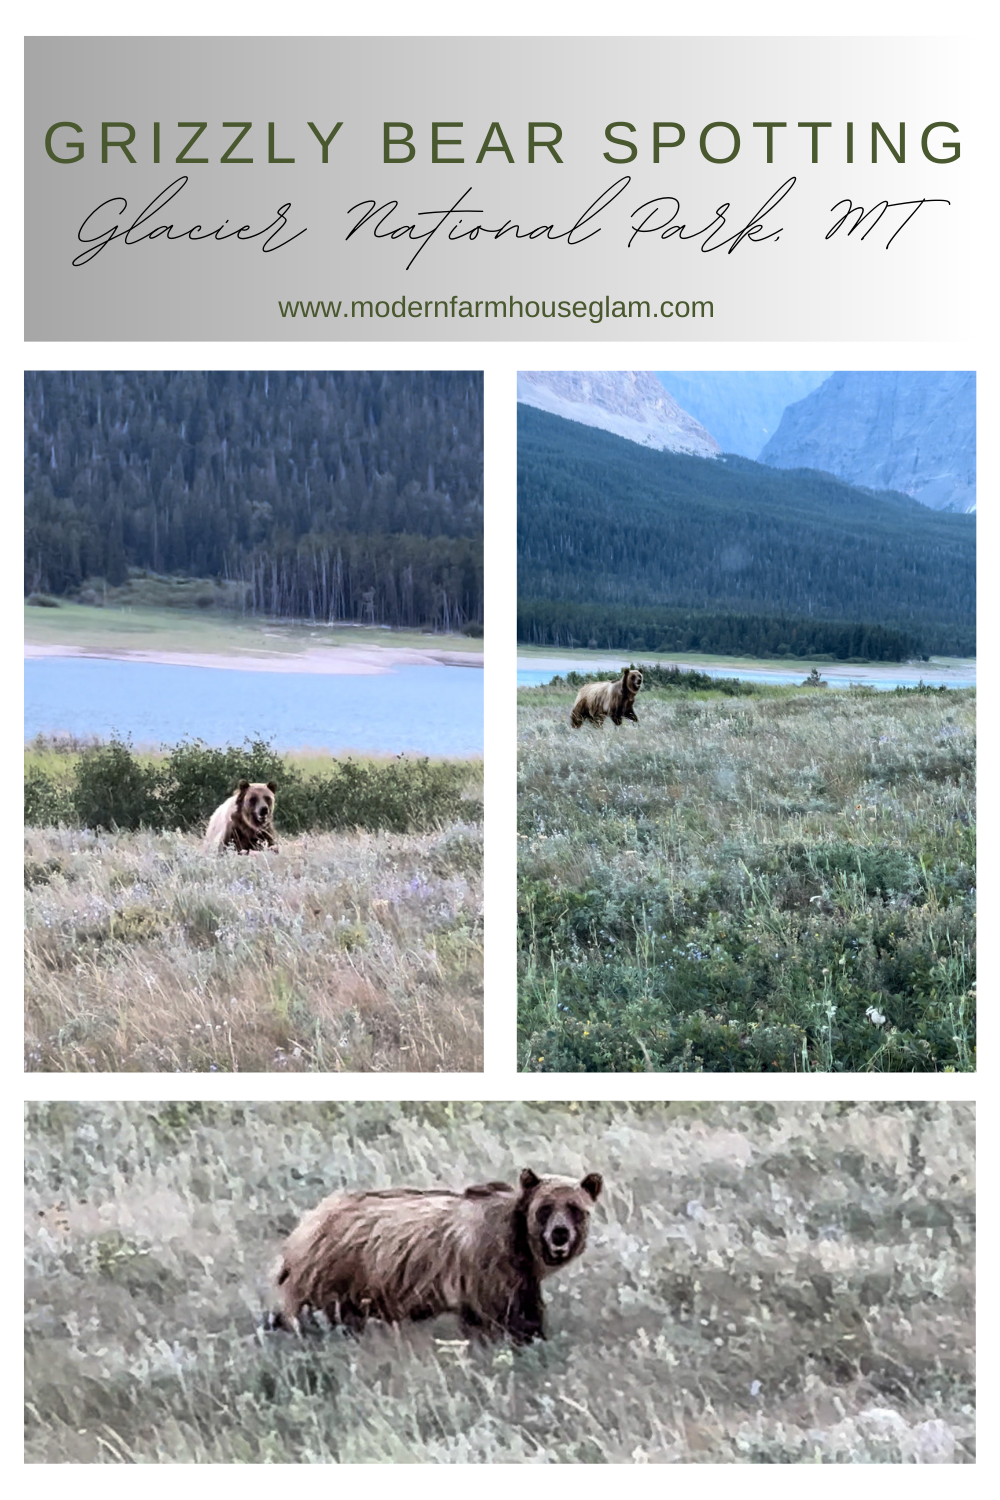 Our Grizzly Bear Sighting in Glacier National Park, MT